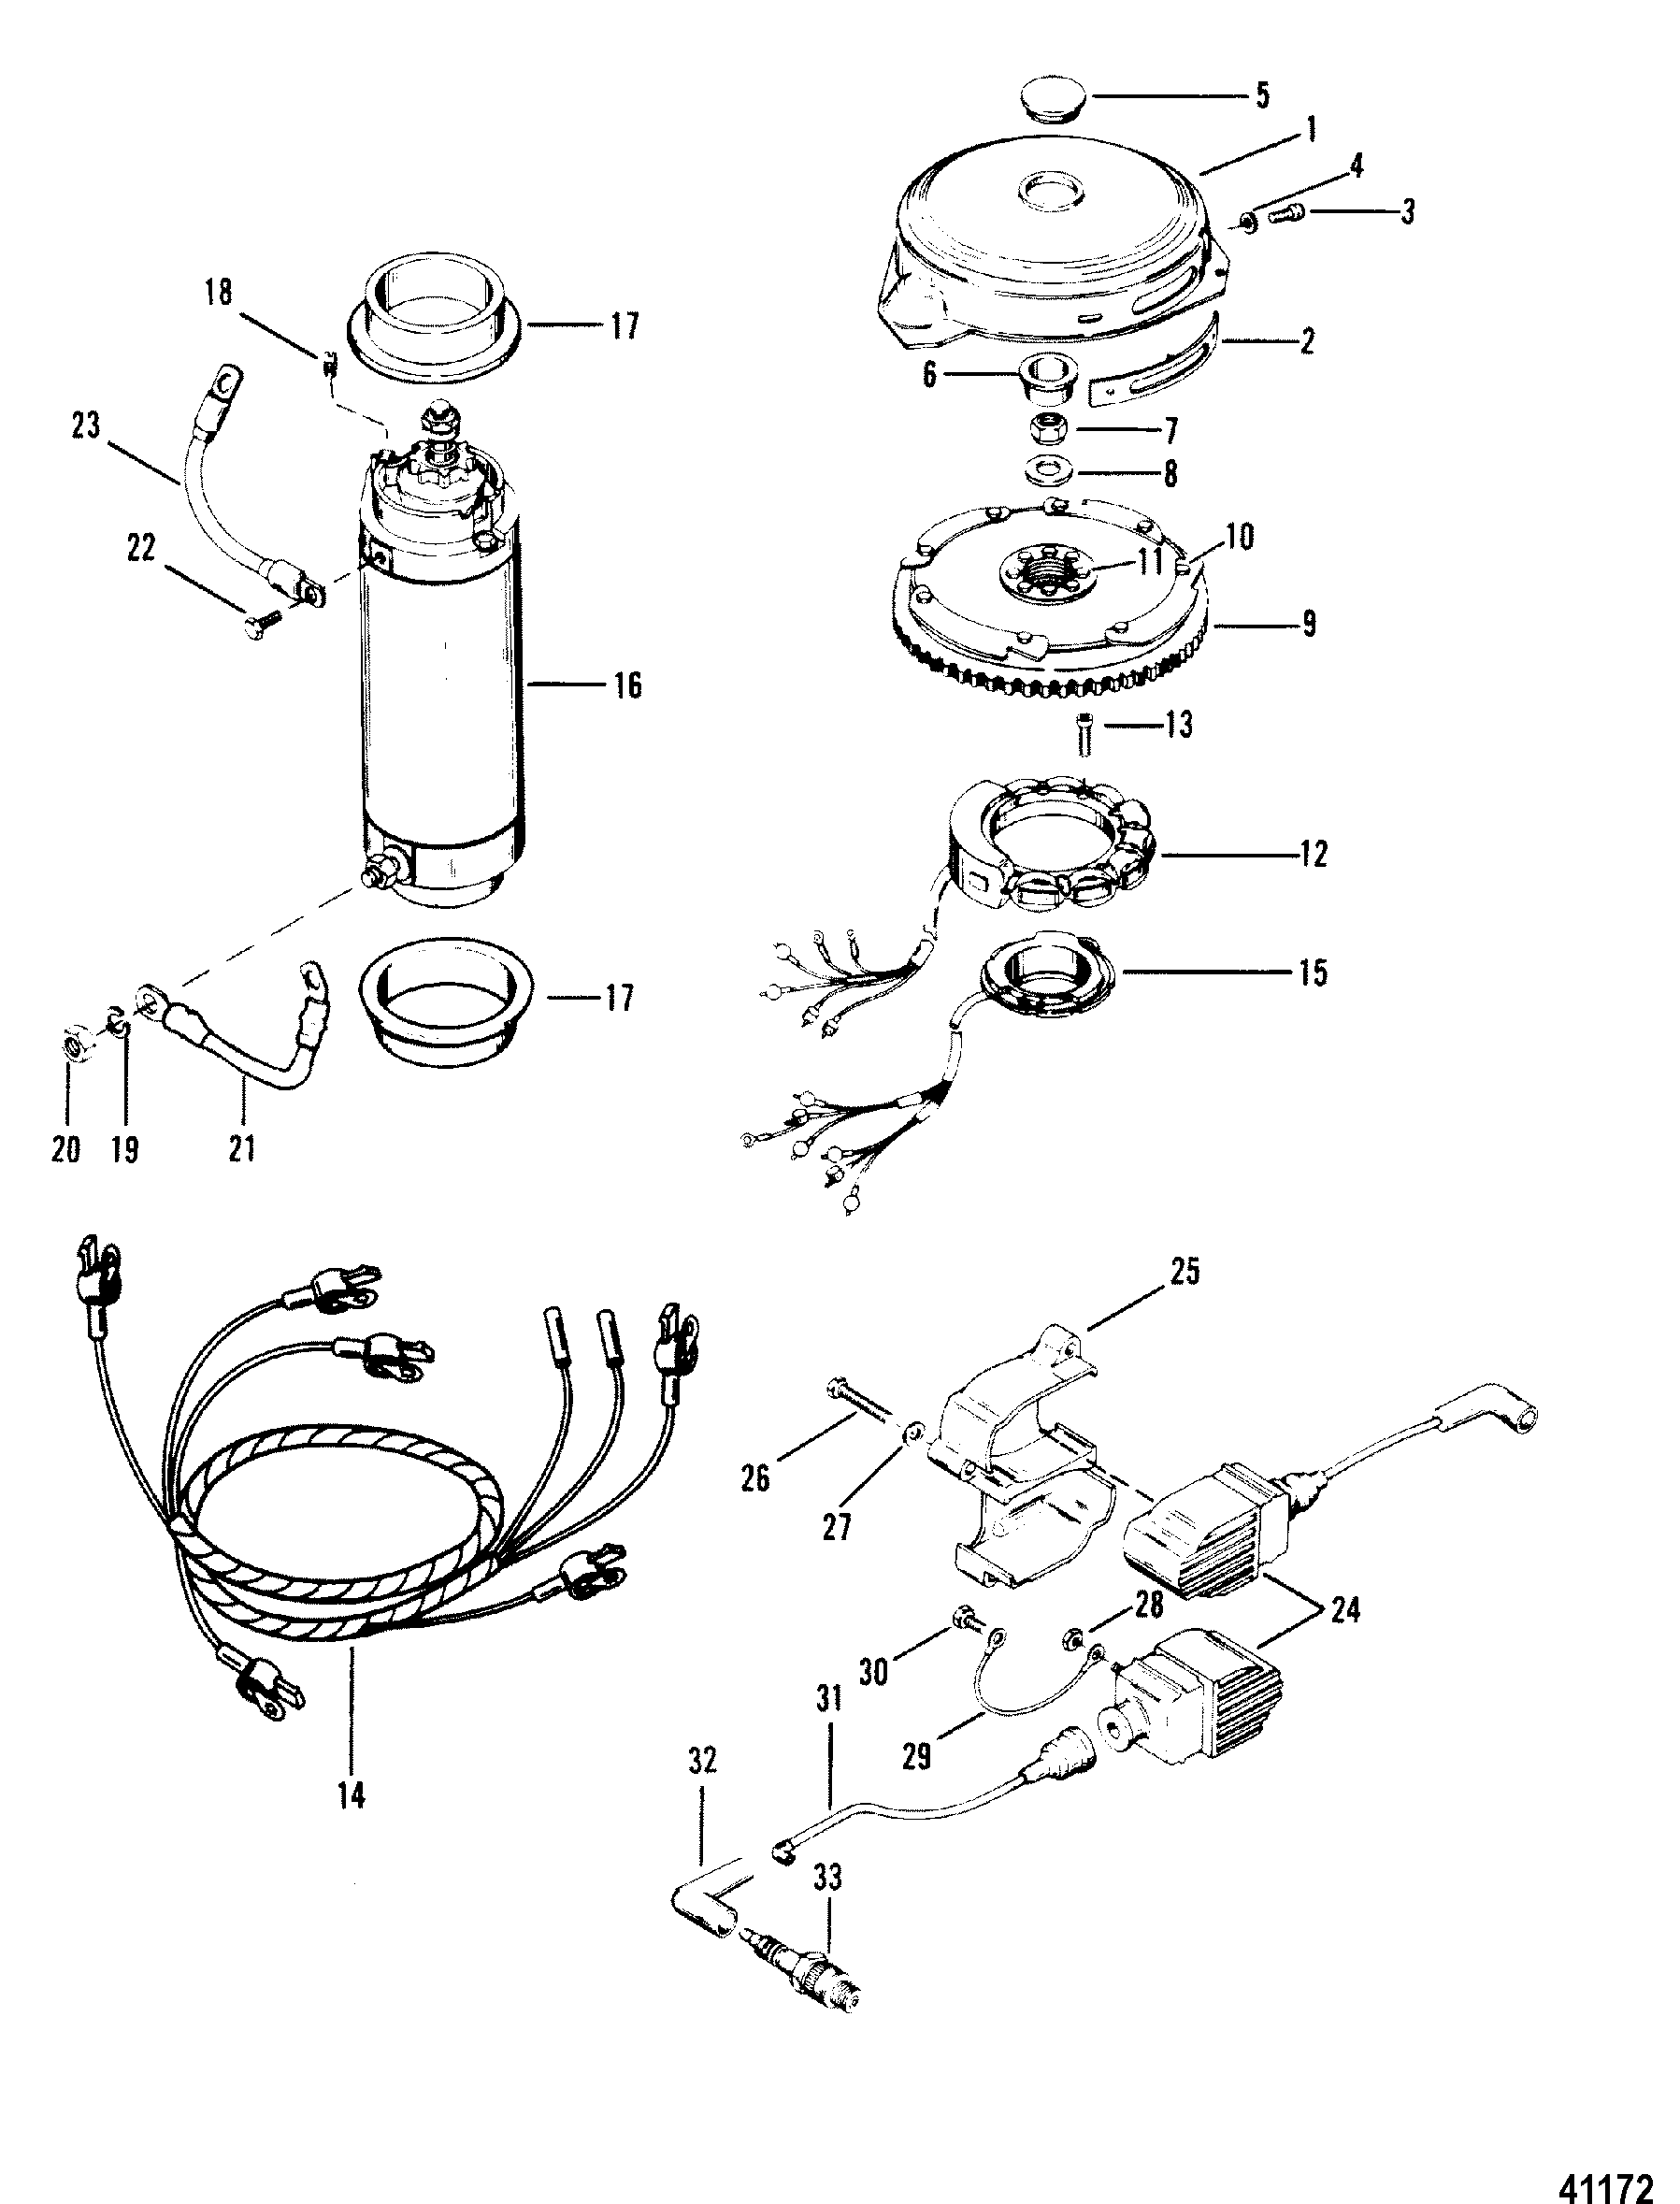 FLYWHEEL, STARTER MOTOR AND IGNITION COILS